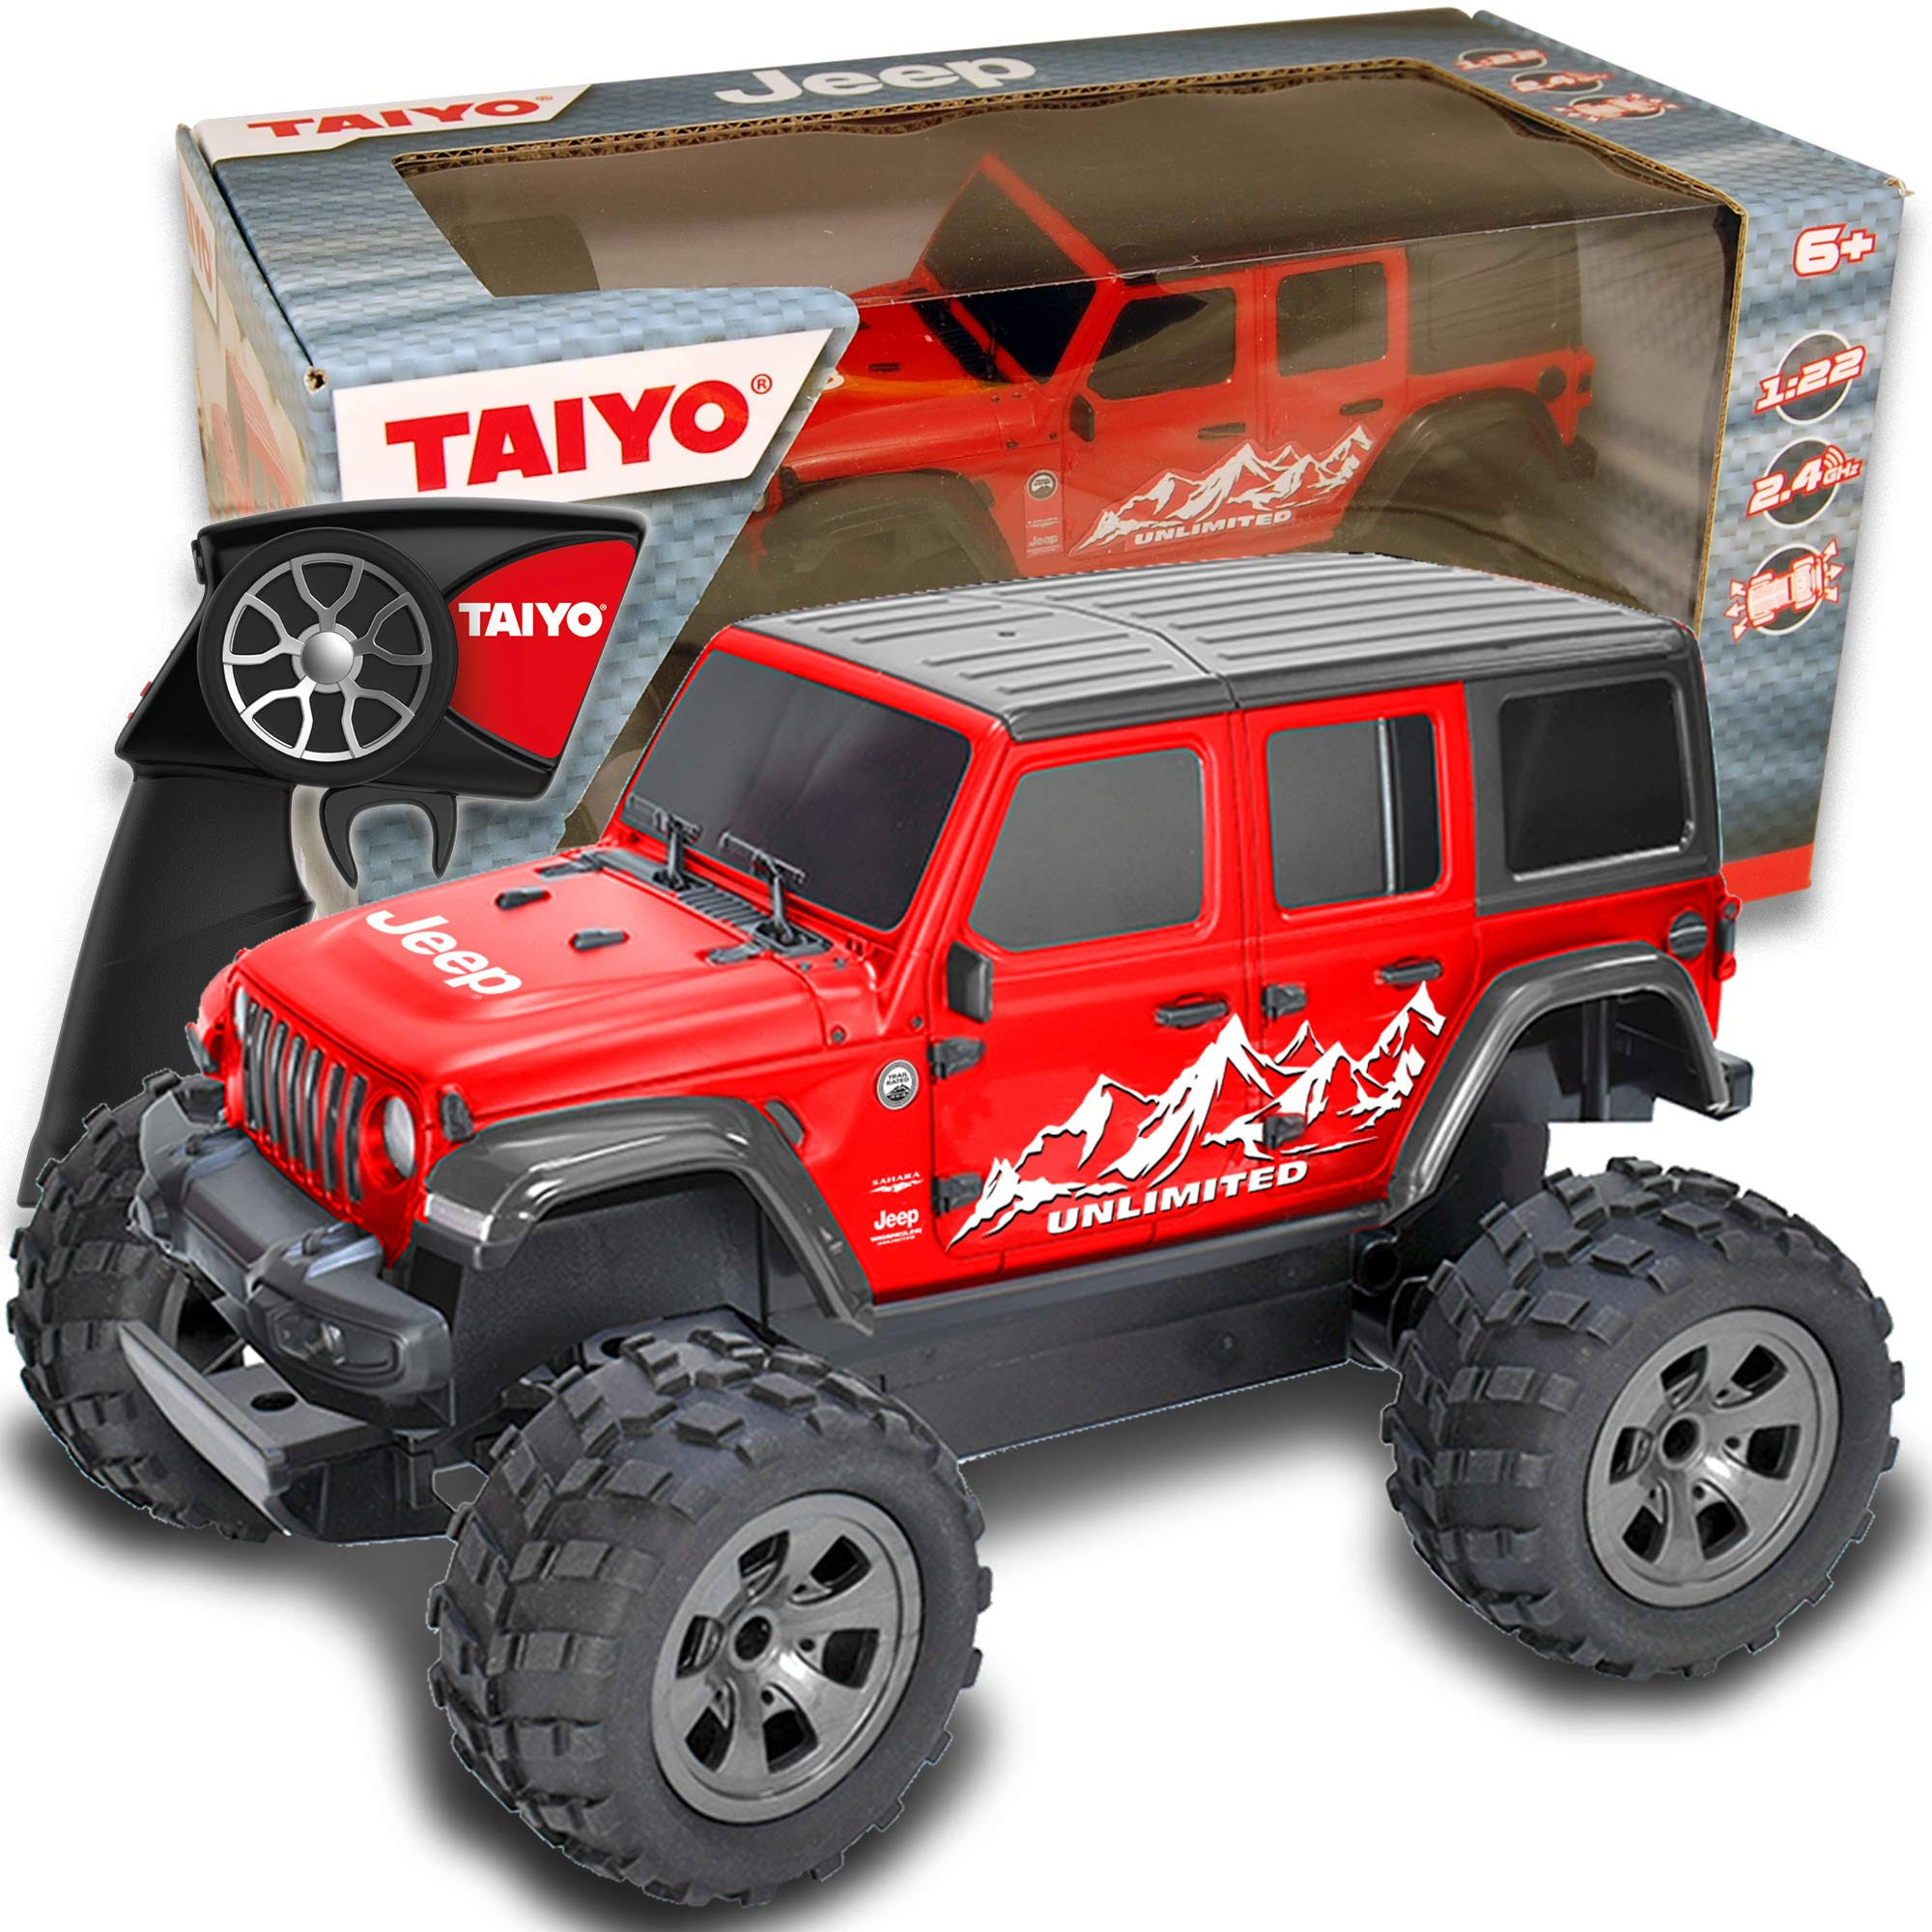 Taiyo RC Truck Jeep Rubicon, 1:22 Scale remote Control Car with Handset Controller for Off-Road, High Speed, Fast Hobby Action for Kids and Adults,